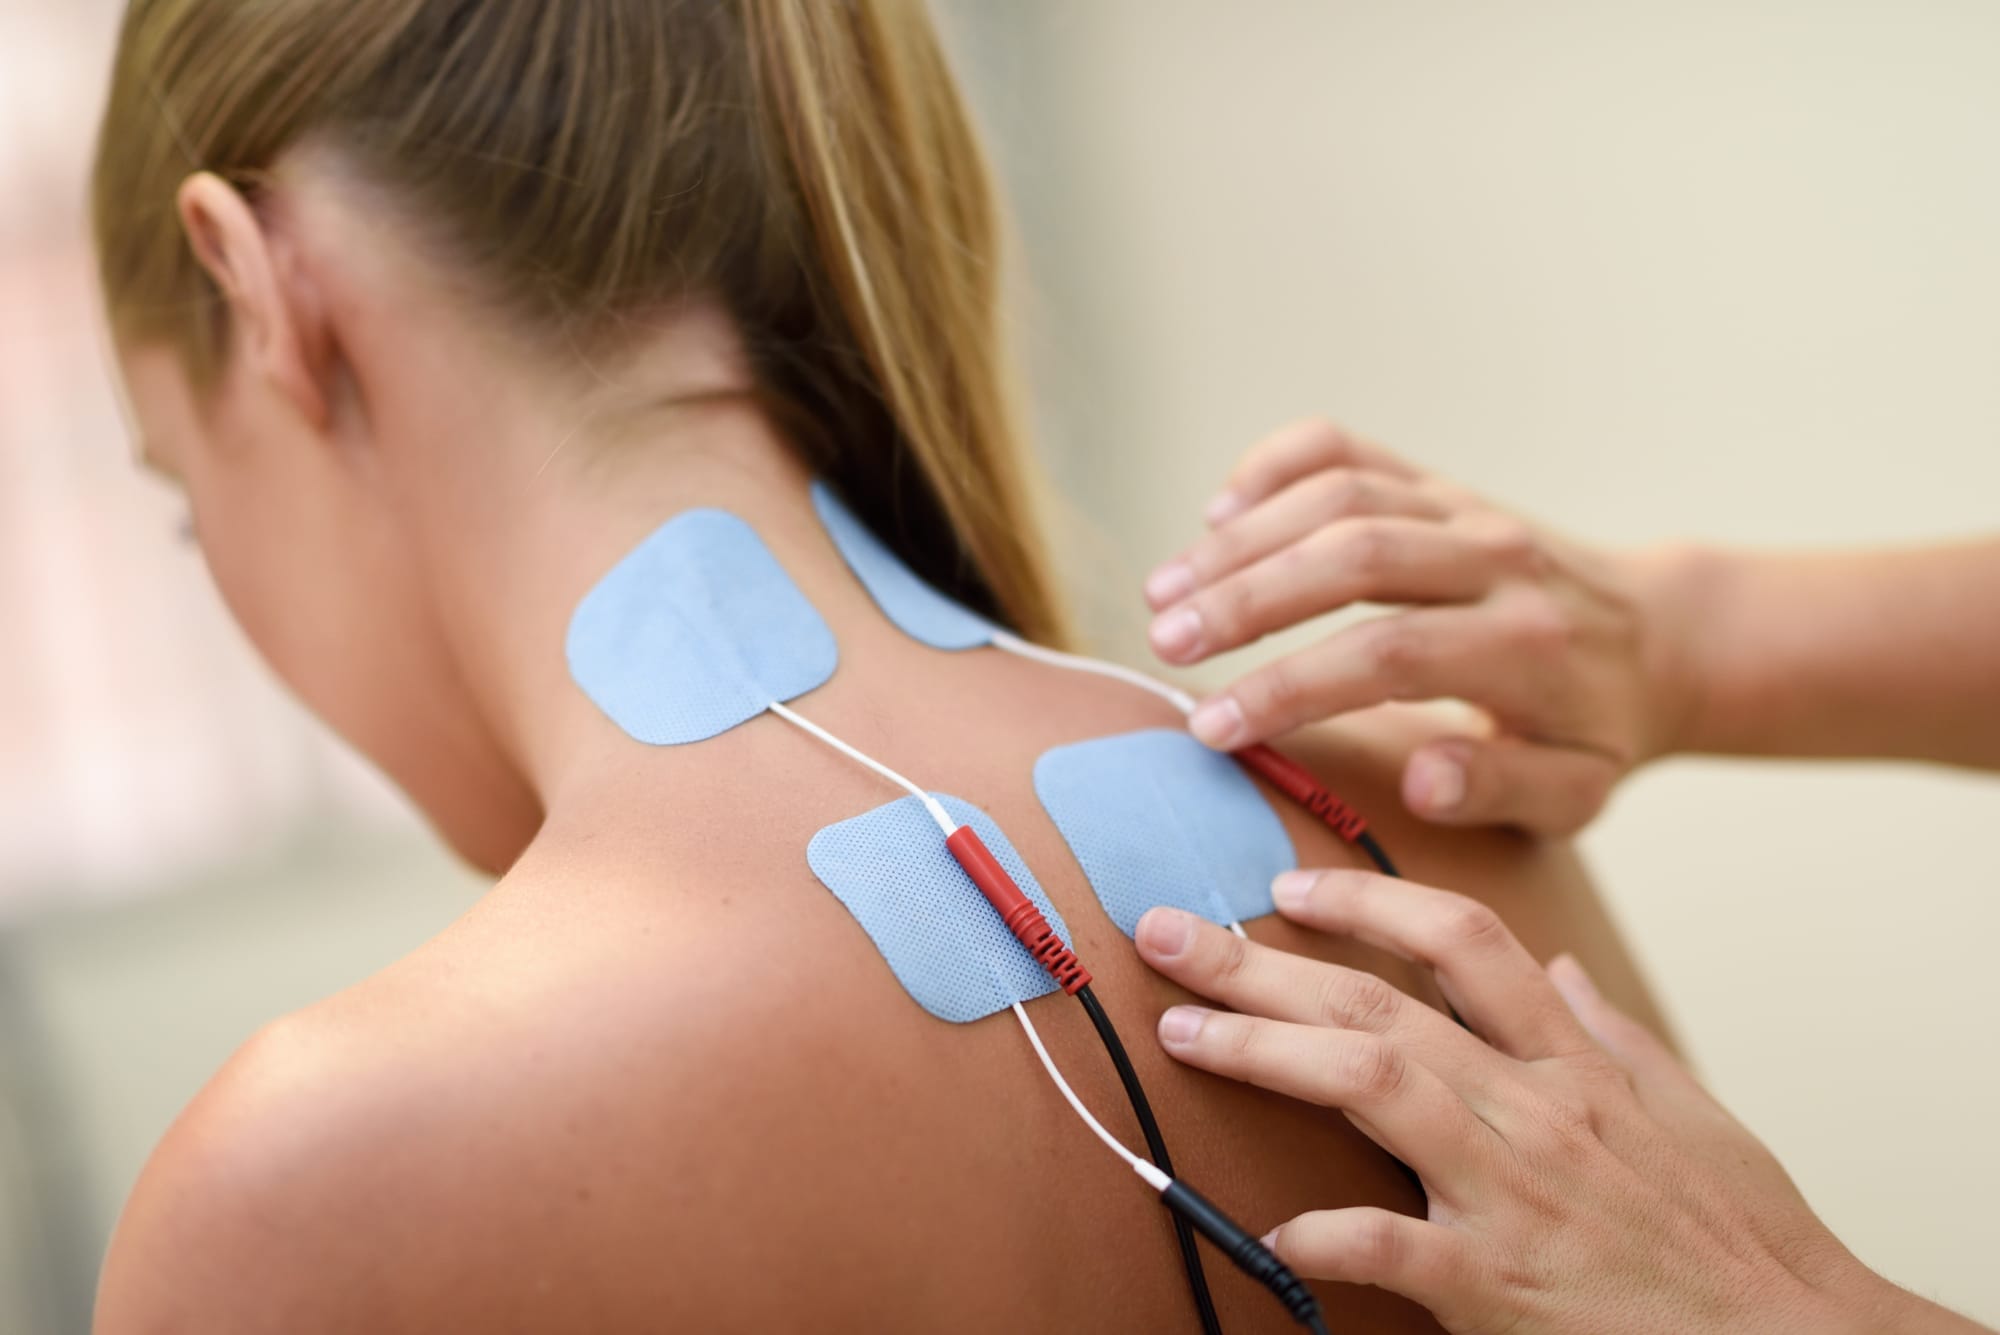 electro-stimulation-physical-therapy-young-woman.jpg